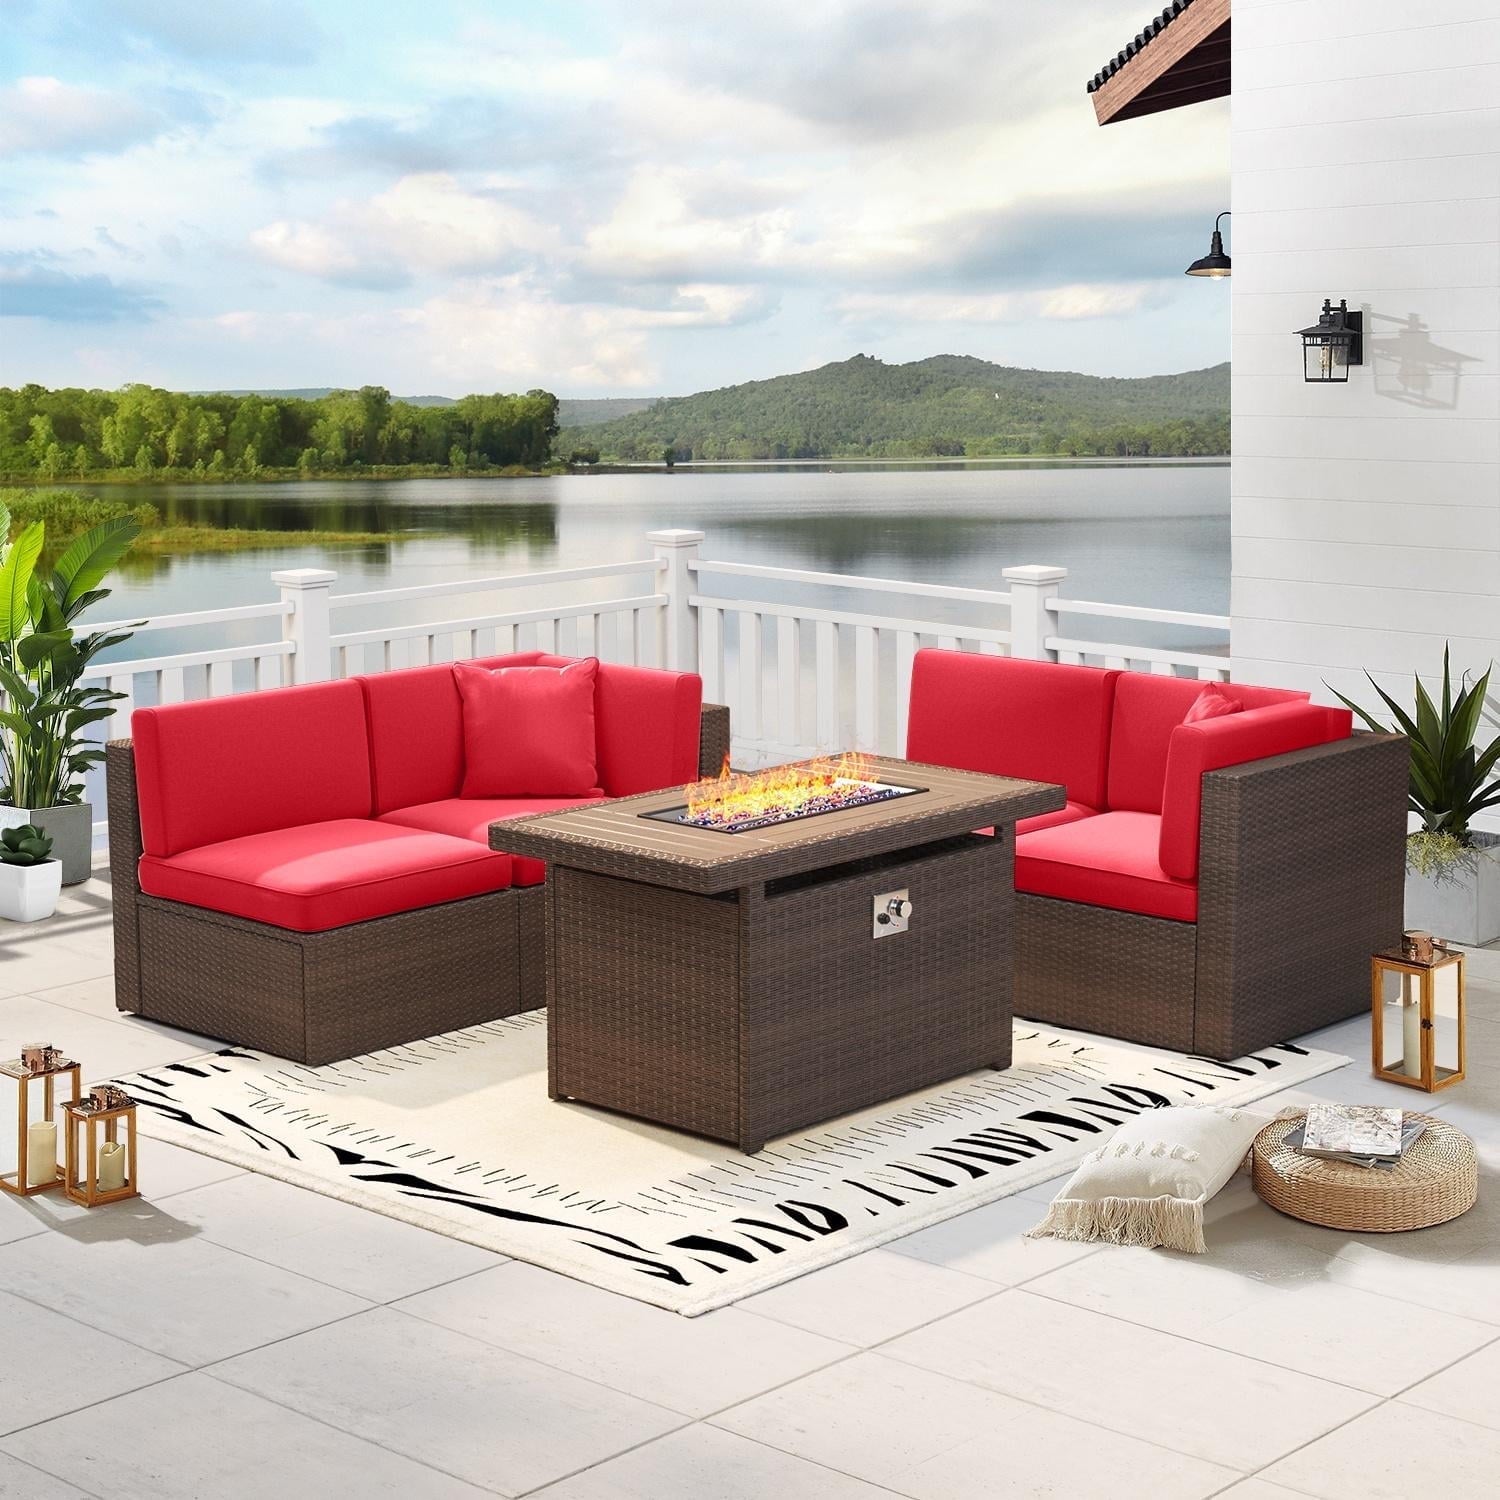 5 Piece Patio Furniture Set, Outdoor Patio Furniture Sets with Fire Pit, Wicker Patio Furniture, Outdoor Conversation Set with Red Cushions